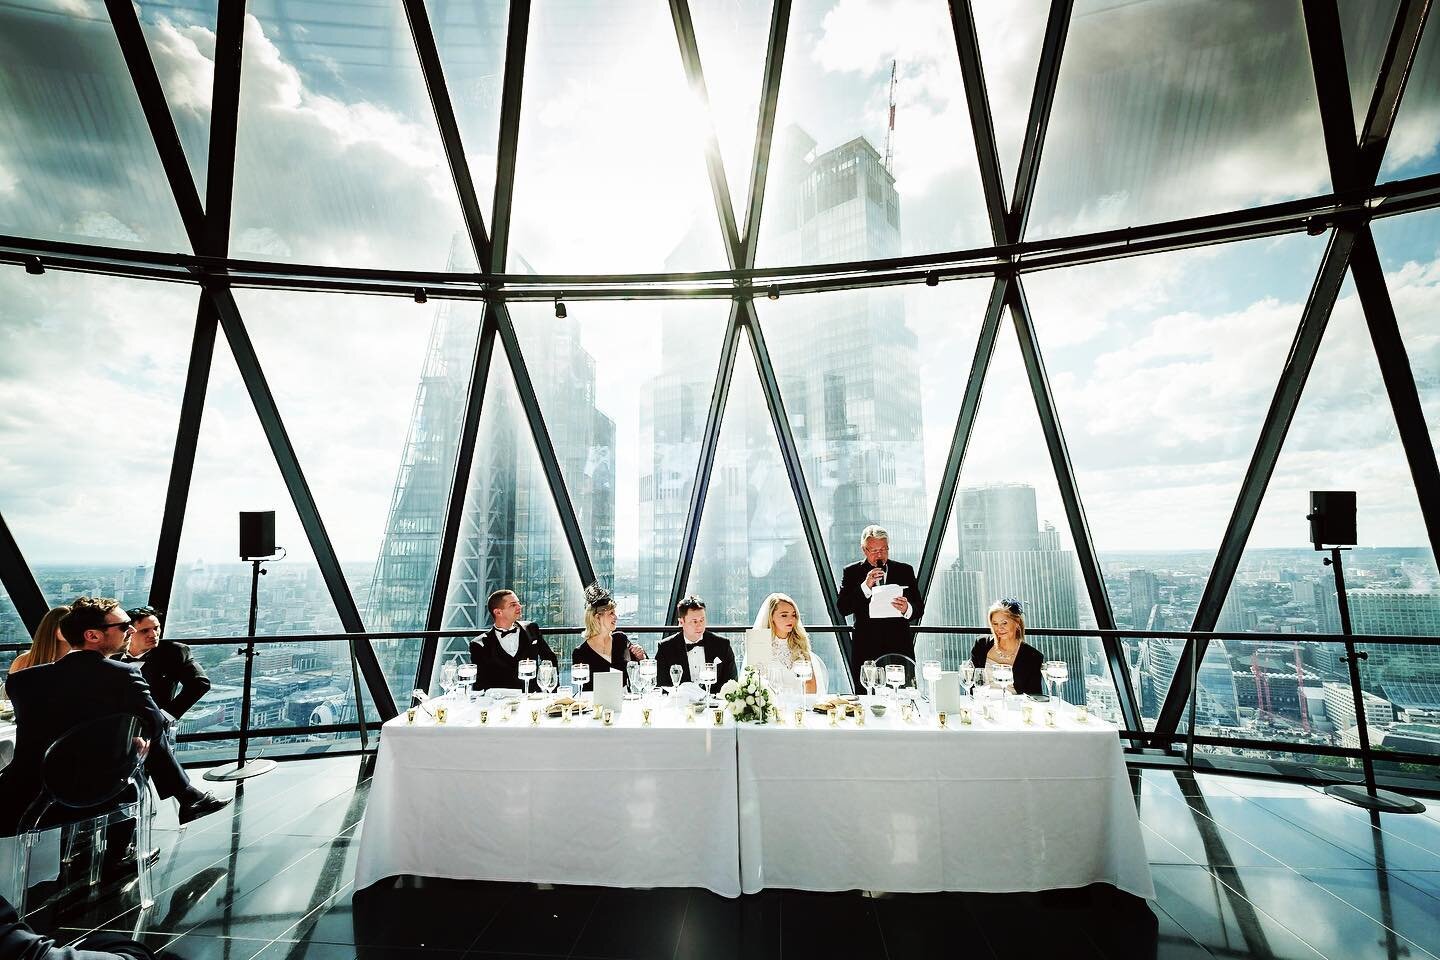 Now this is what I call a top table with a view. @searcysgherkin 
#thegherkin #londonwedding #weddingphoto #weddingphotography #reportageweddingphotography #weddingbreakfast